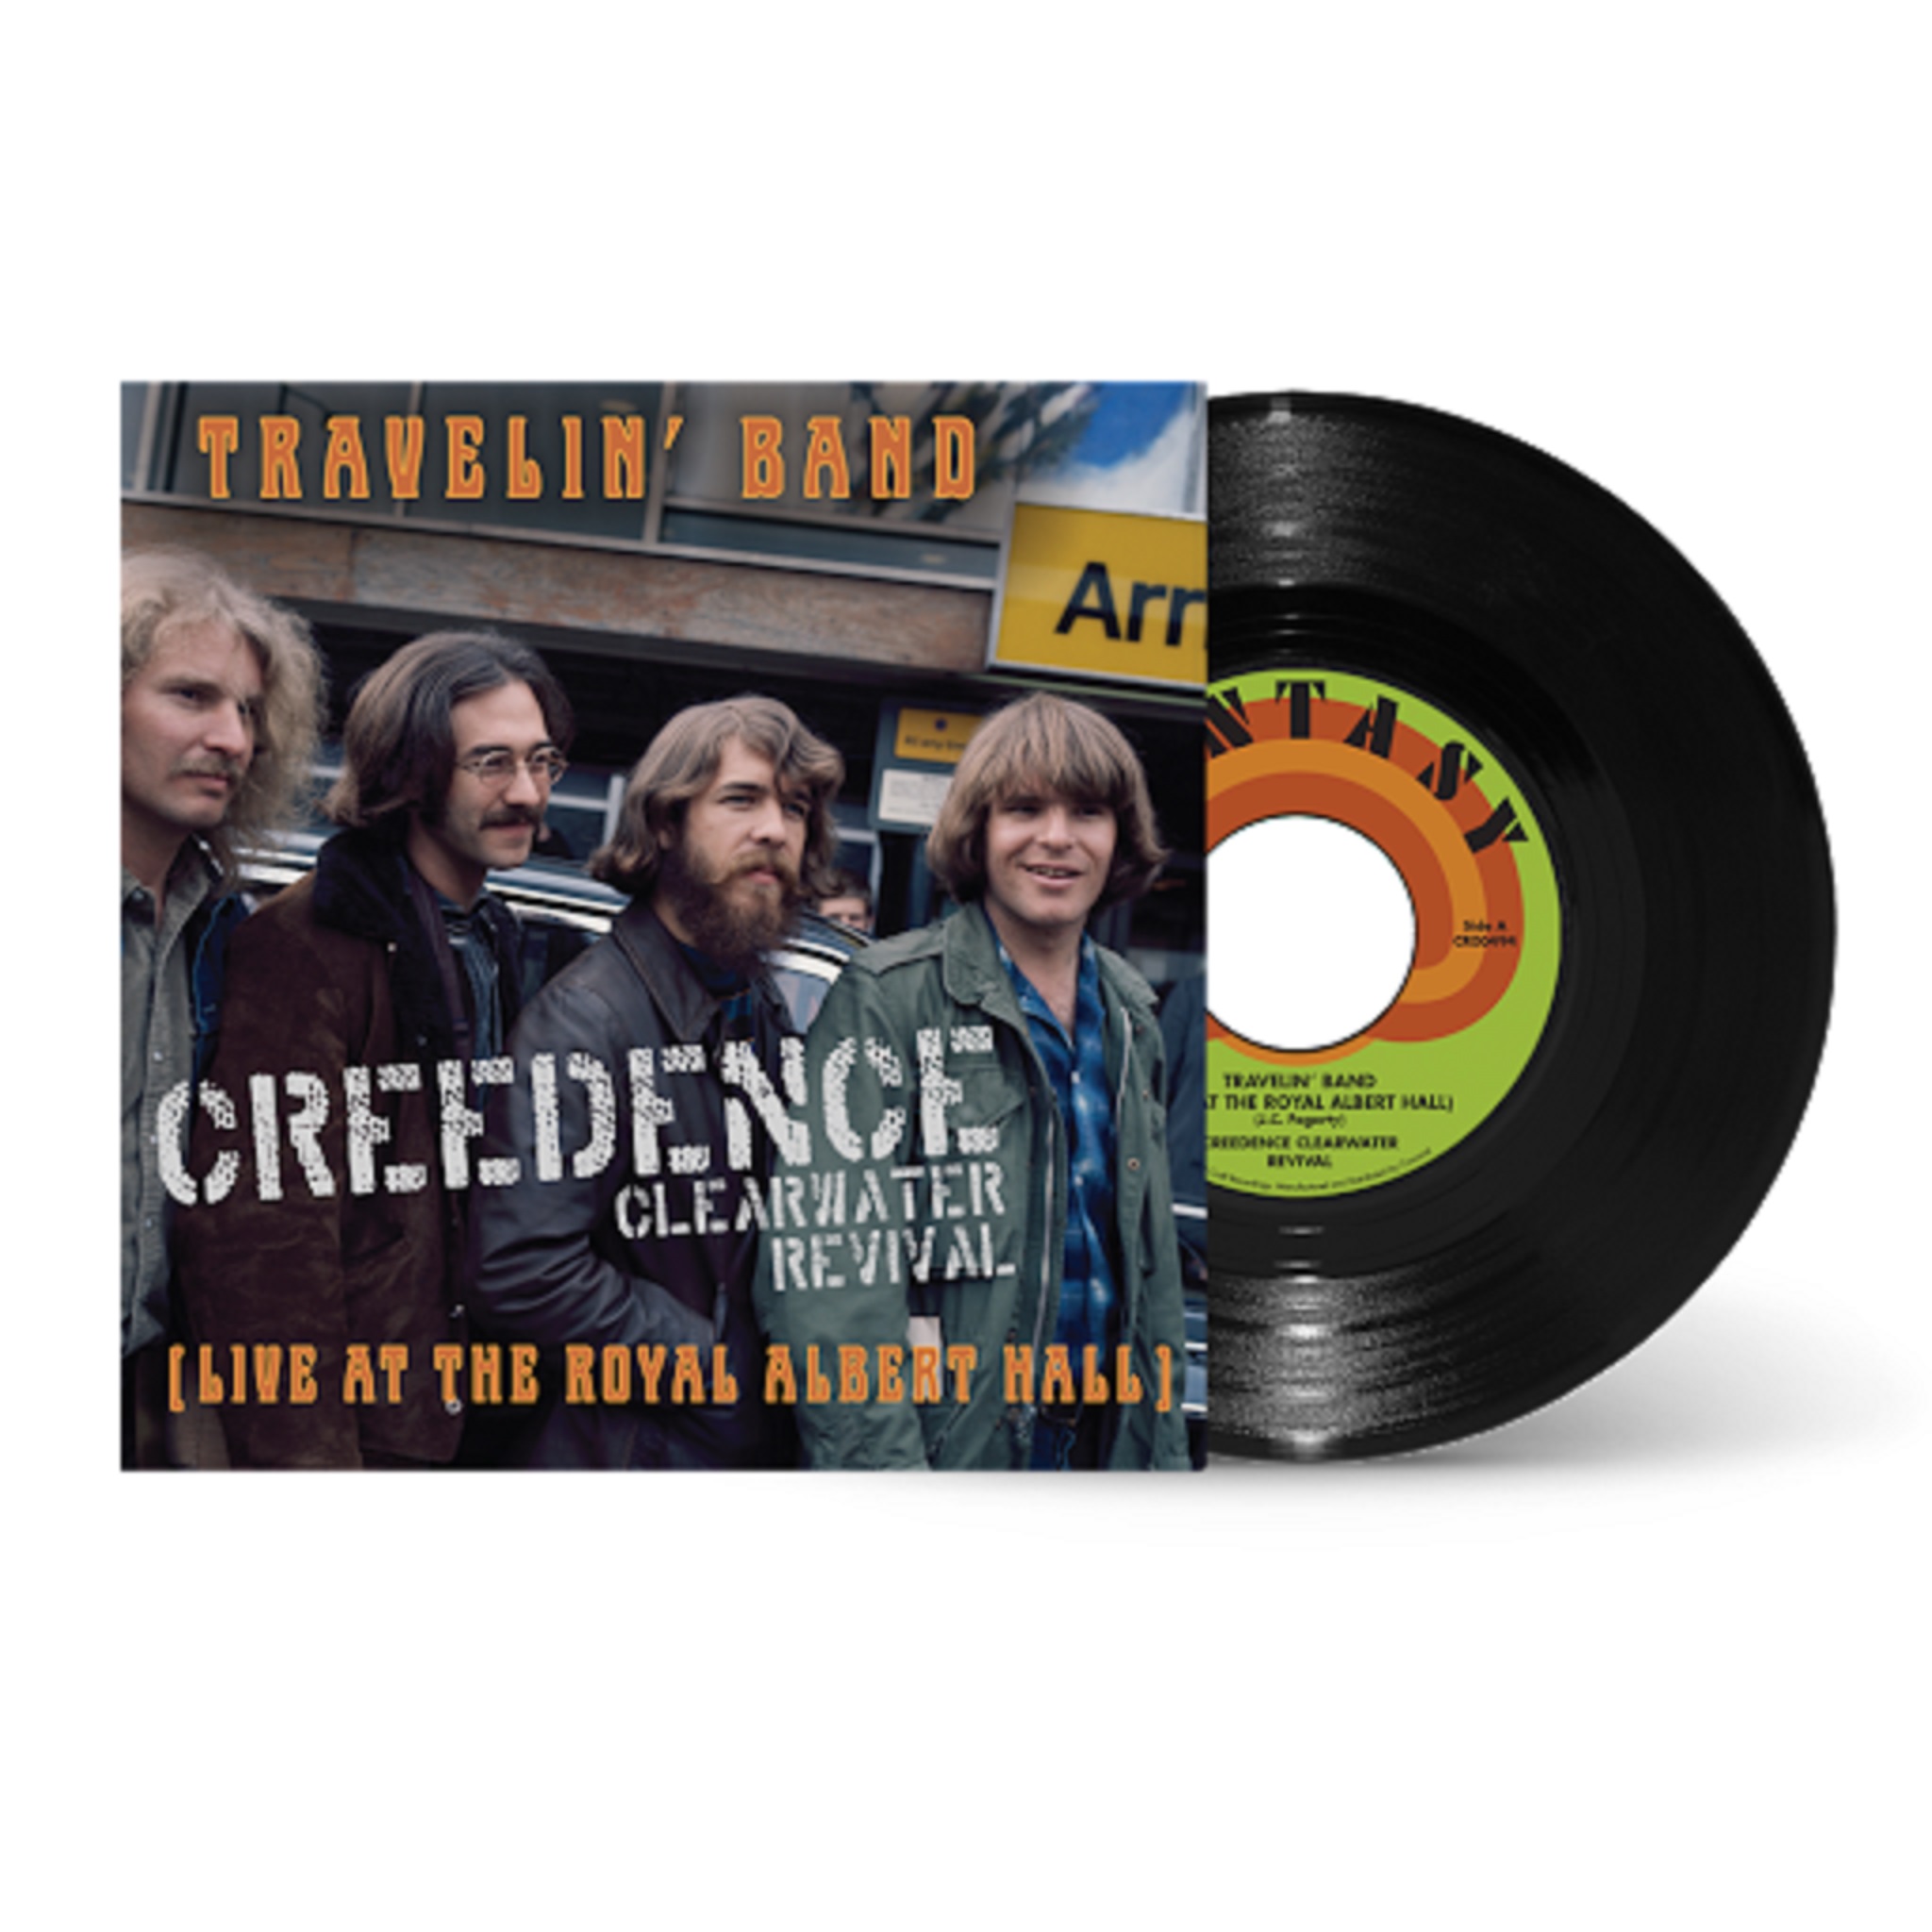 Available on June 18, the 1970 recording offers a first taste of CCR’s mythical London performance